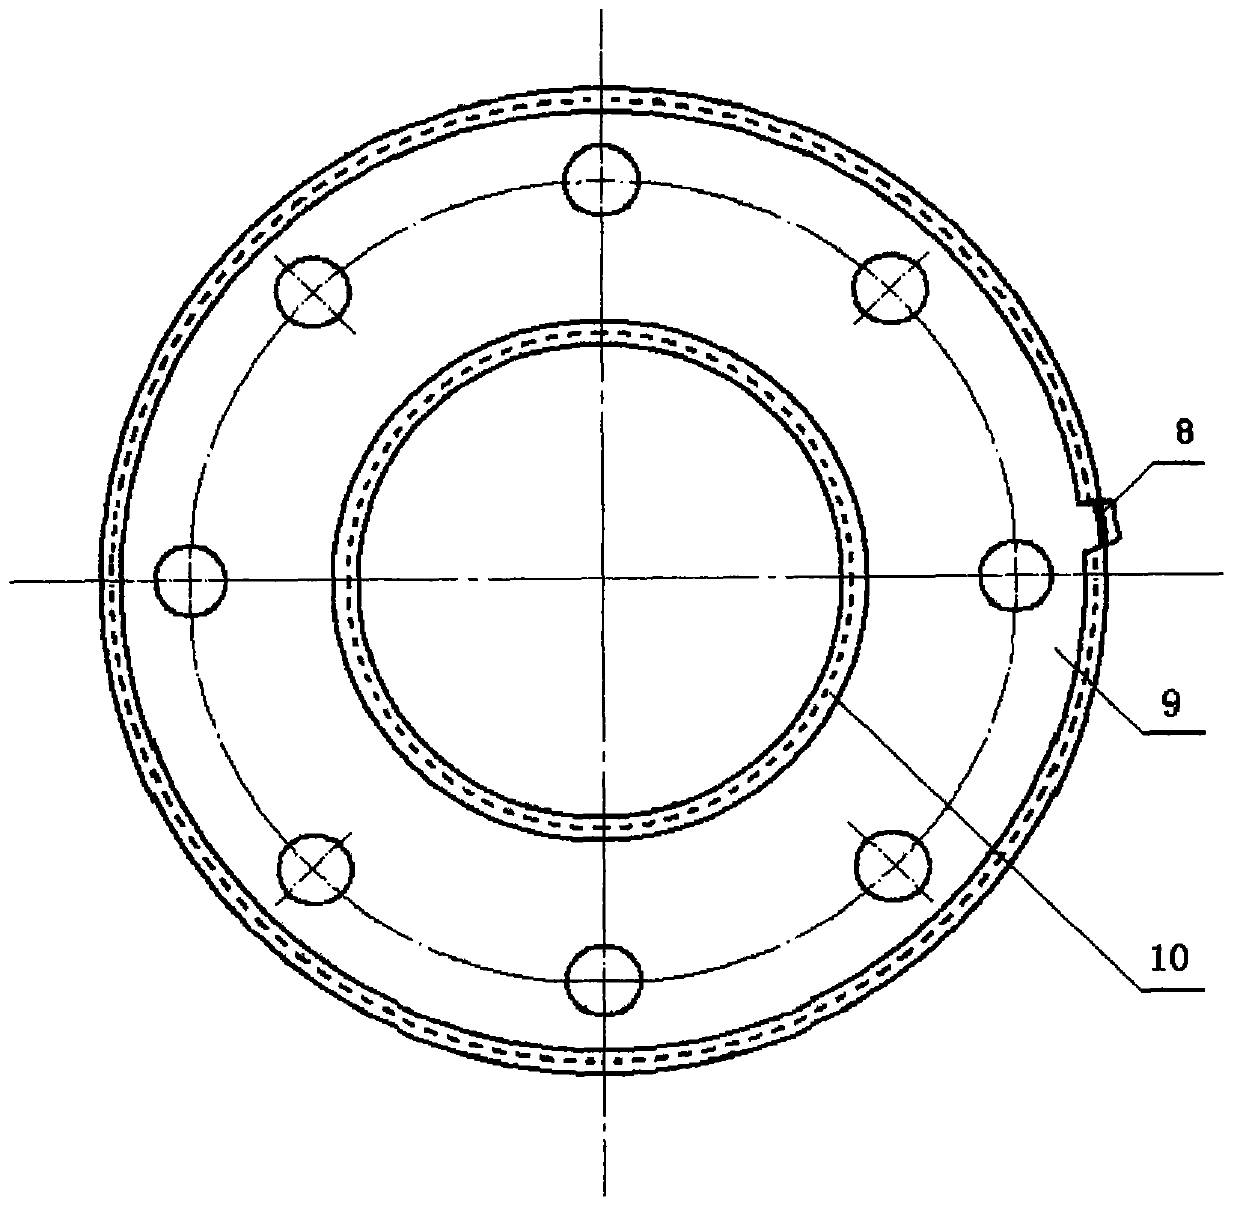 Perforated annular positioning flow choking device